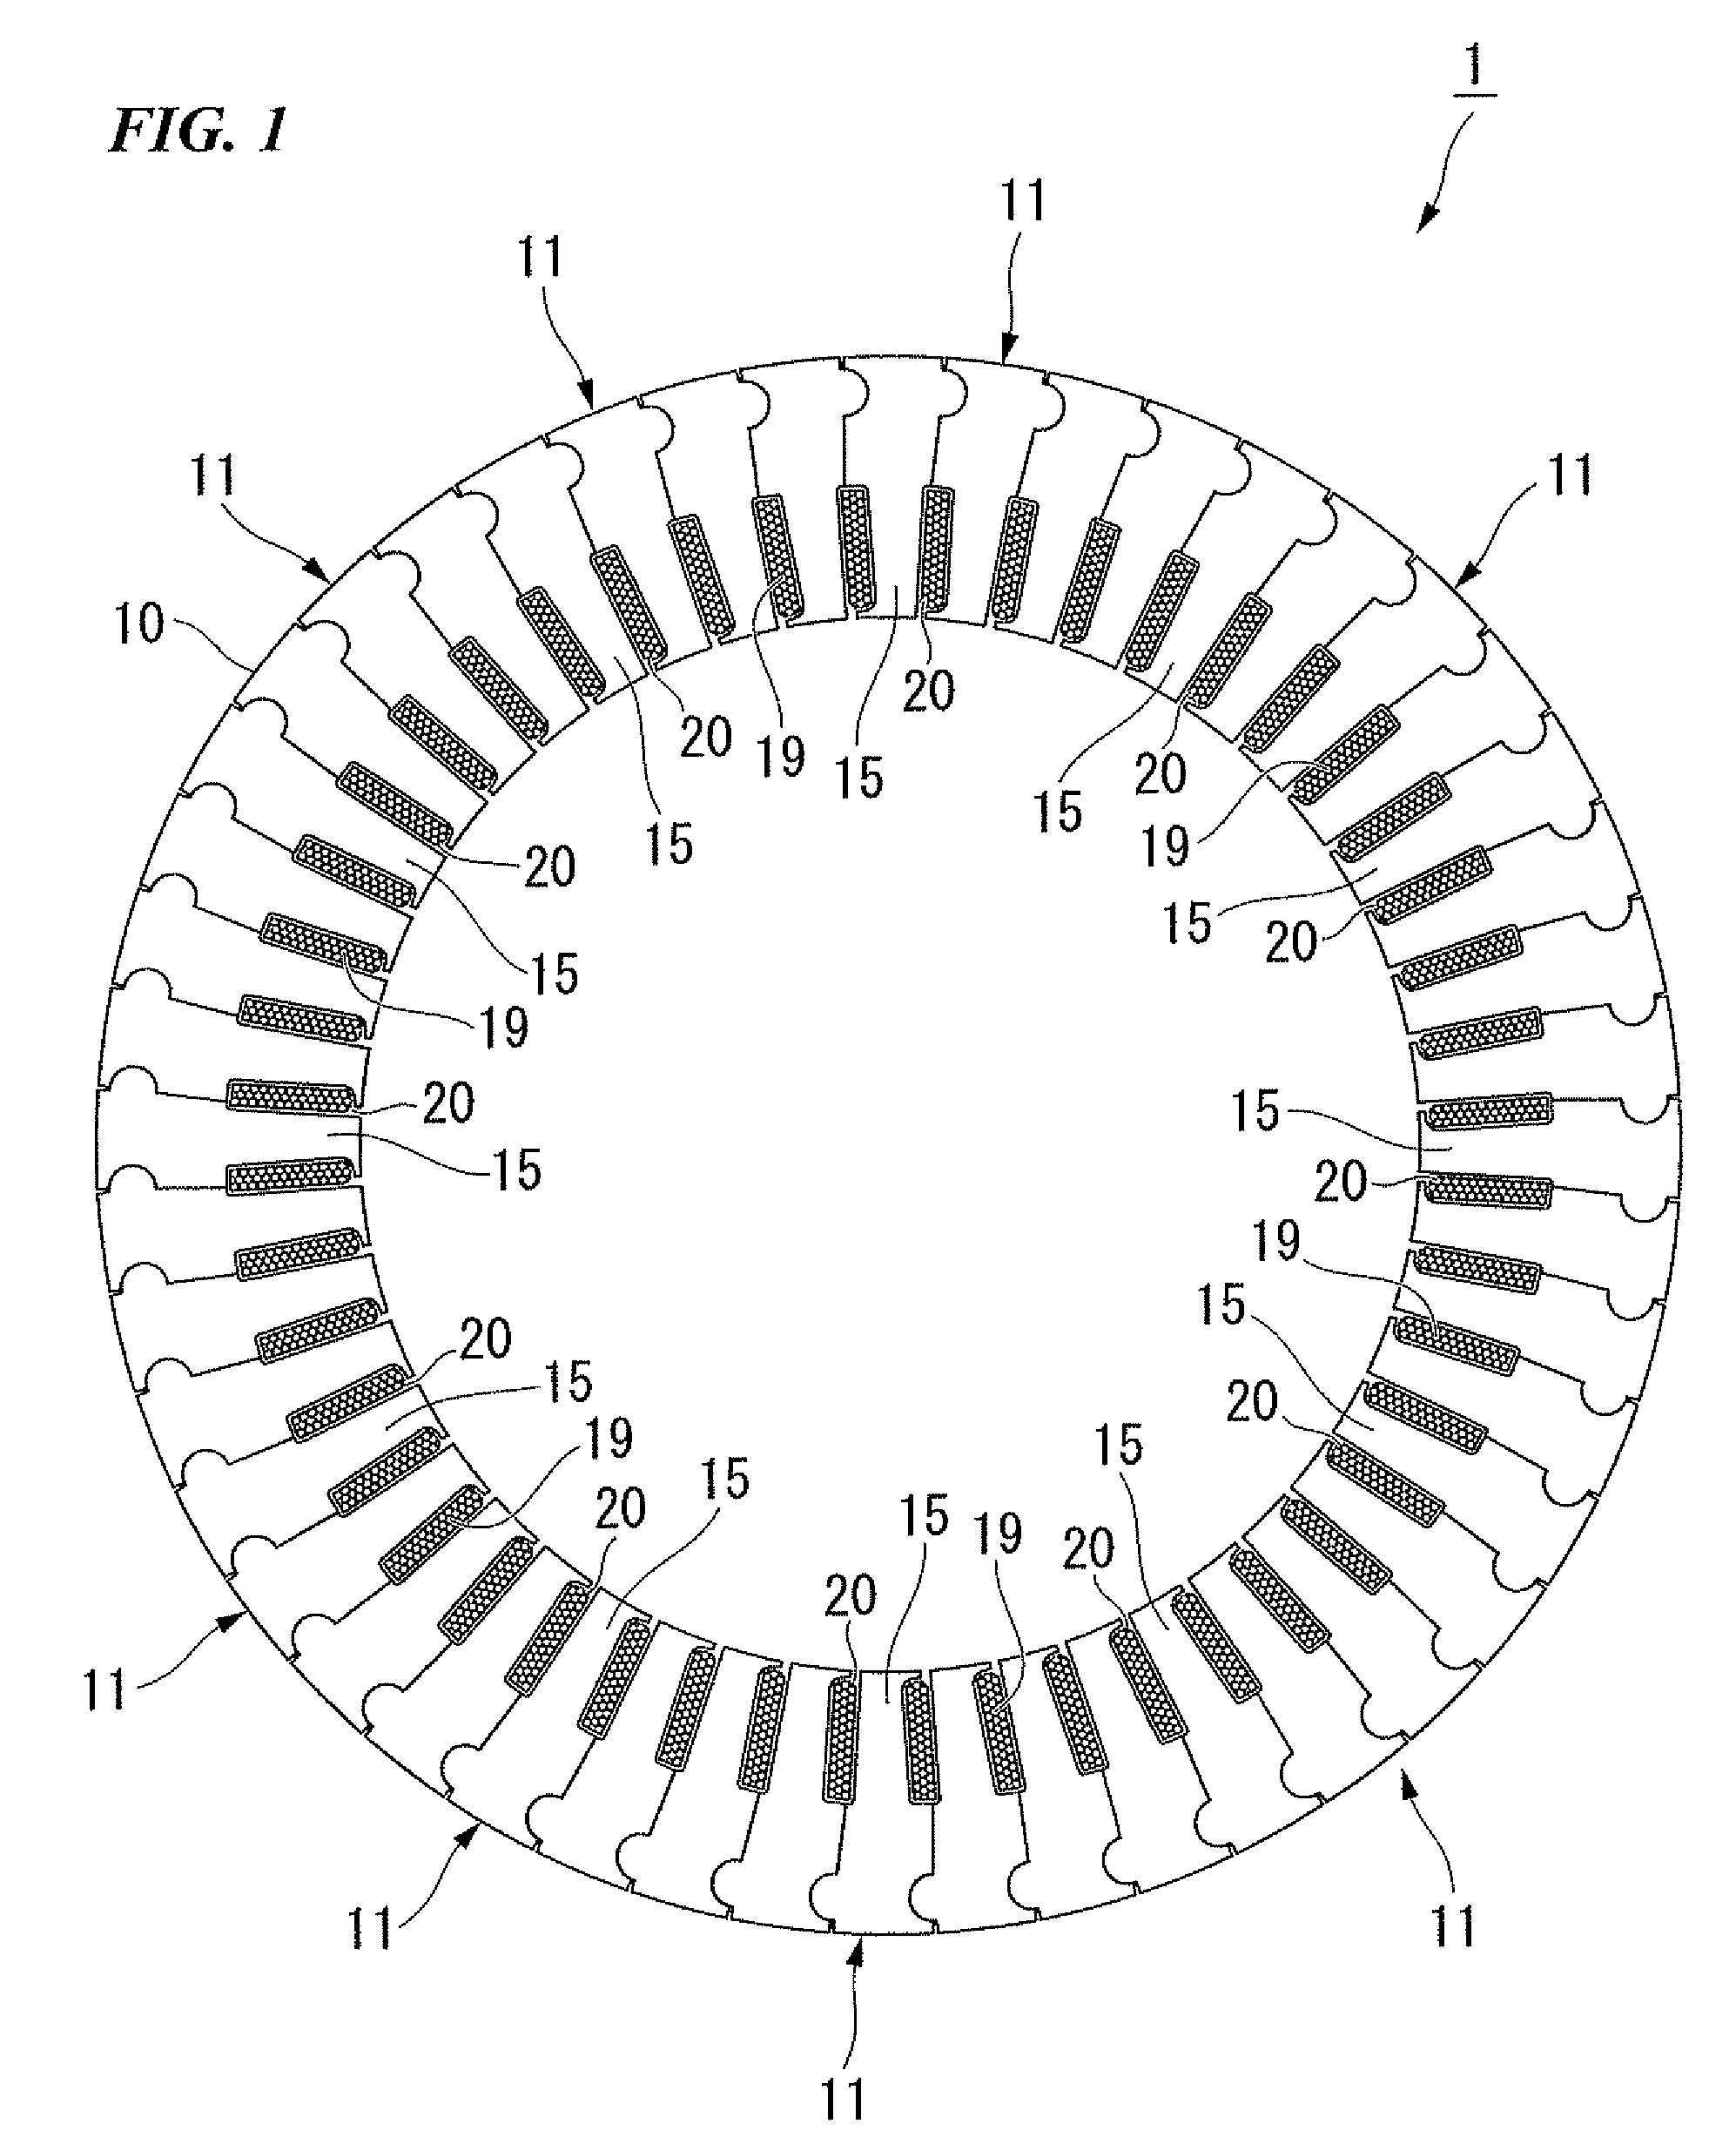 Motor with stator configuration for increased coil length and coil space factors